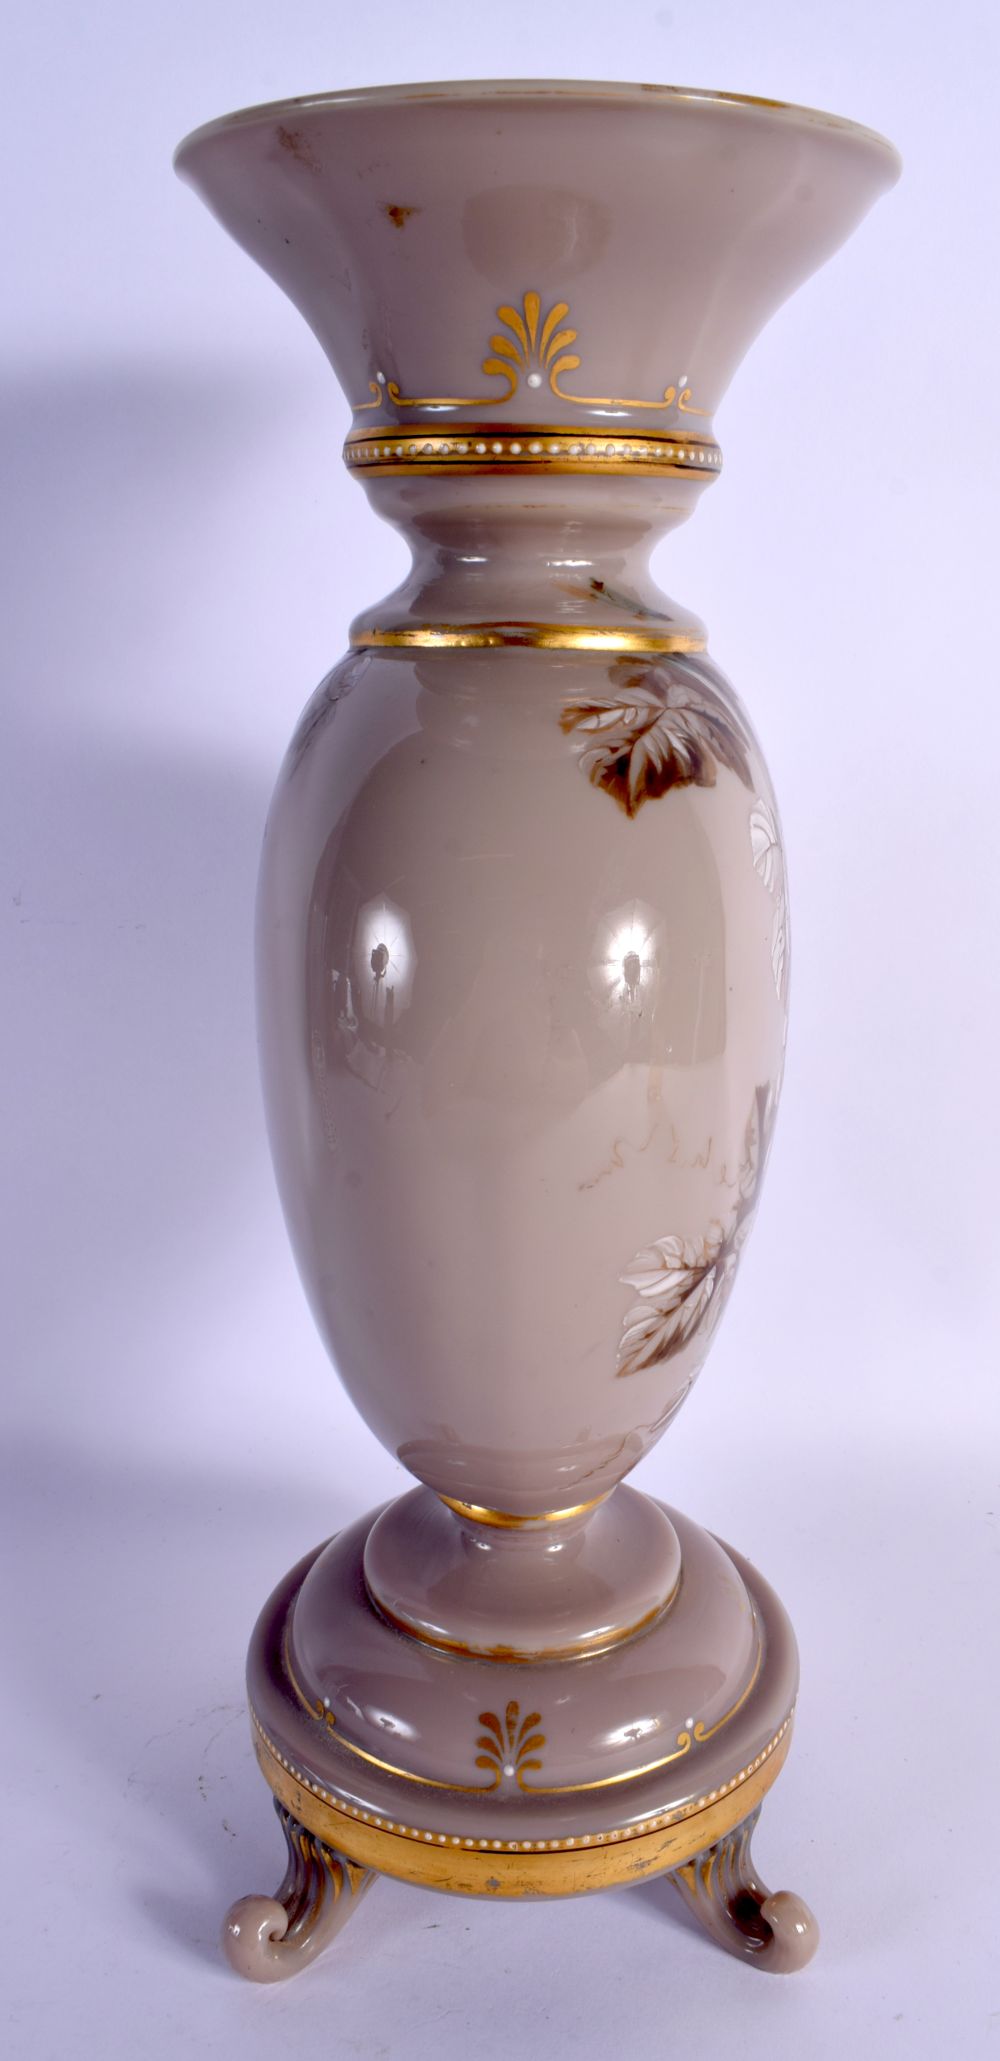 A LARGE LATE VICTORIAN OPALINE GLASS VASE painted with berries and leaves. 36 cm x 15 cm. - Image 4 of 6